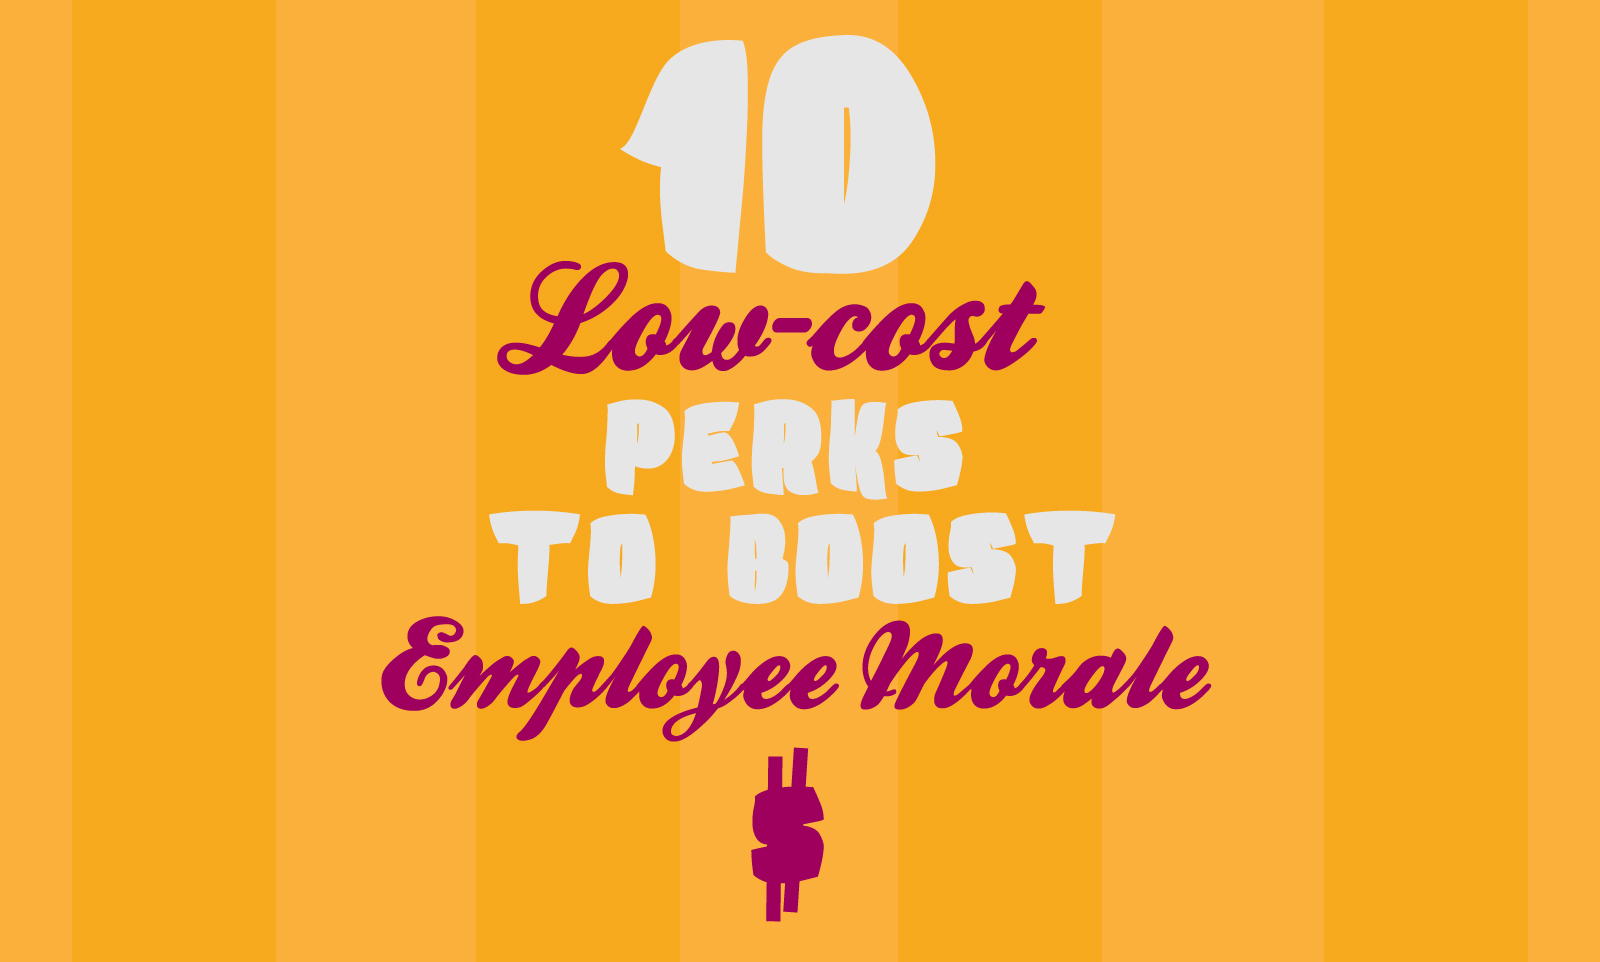 10 Low-Cost Perks to Boost Employee Morale - When I Work